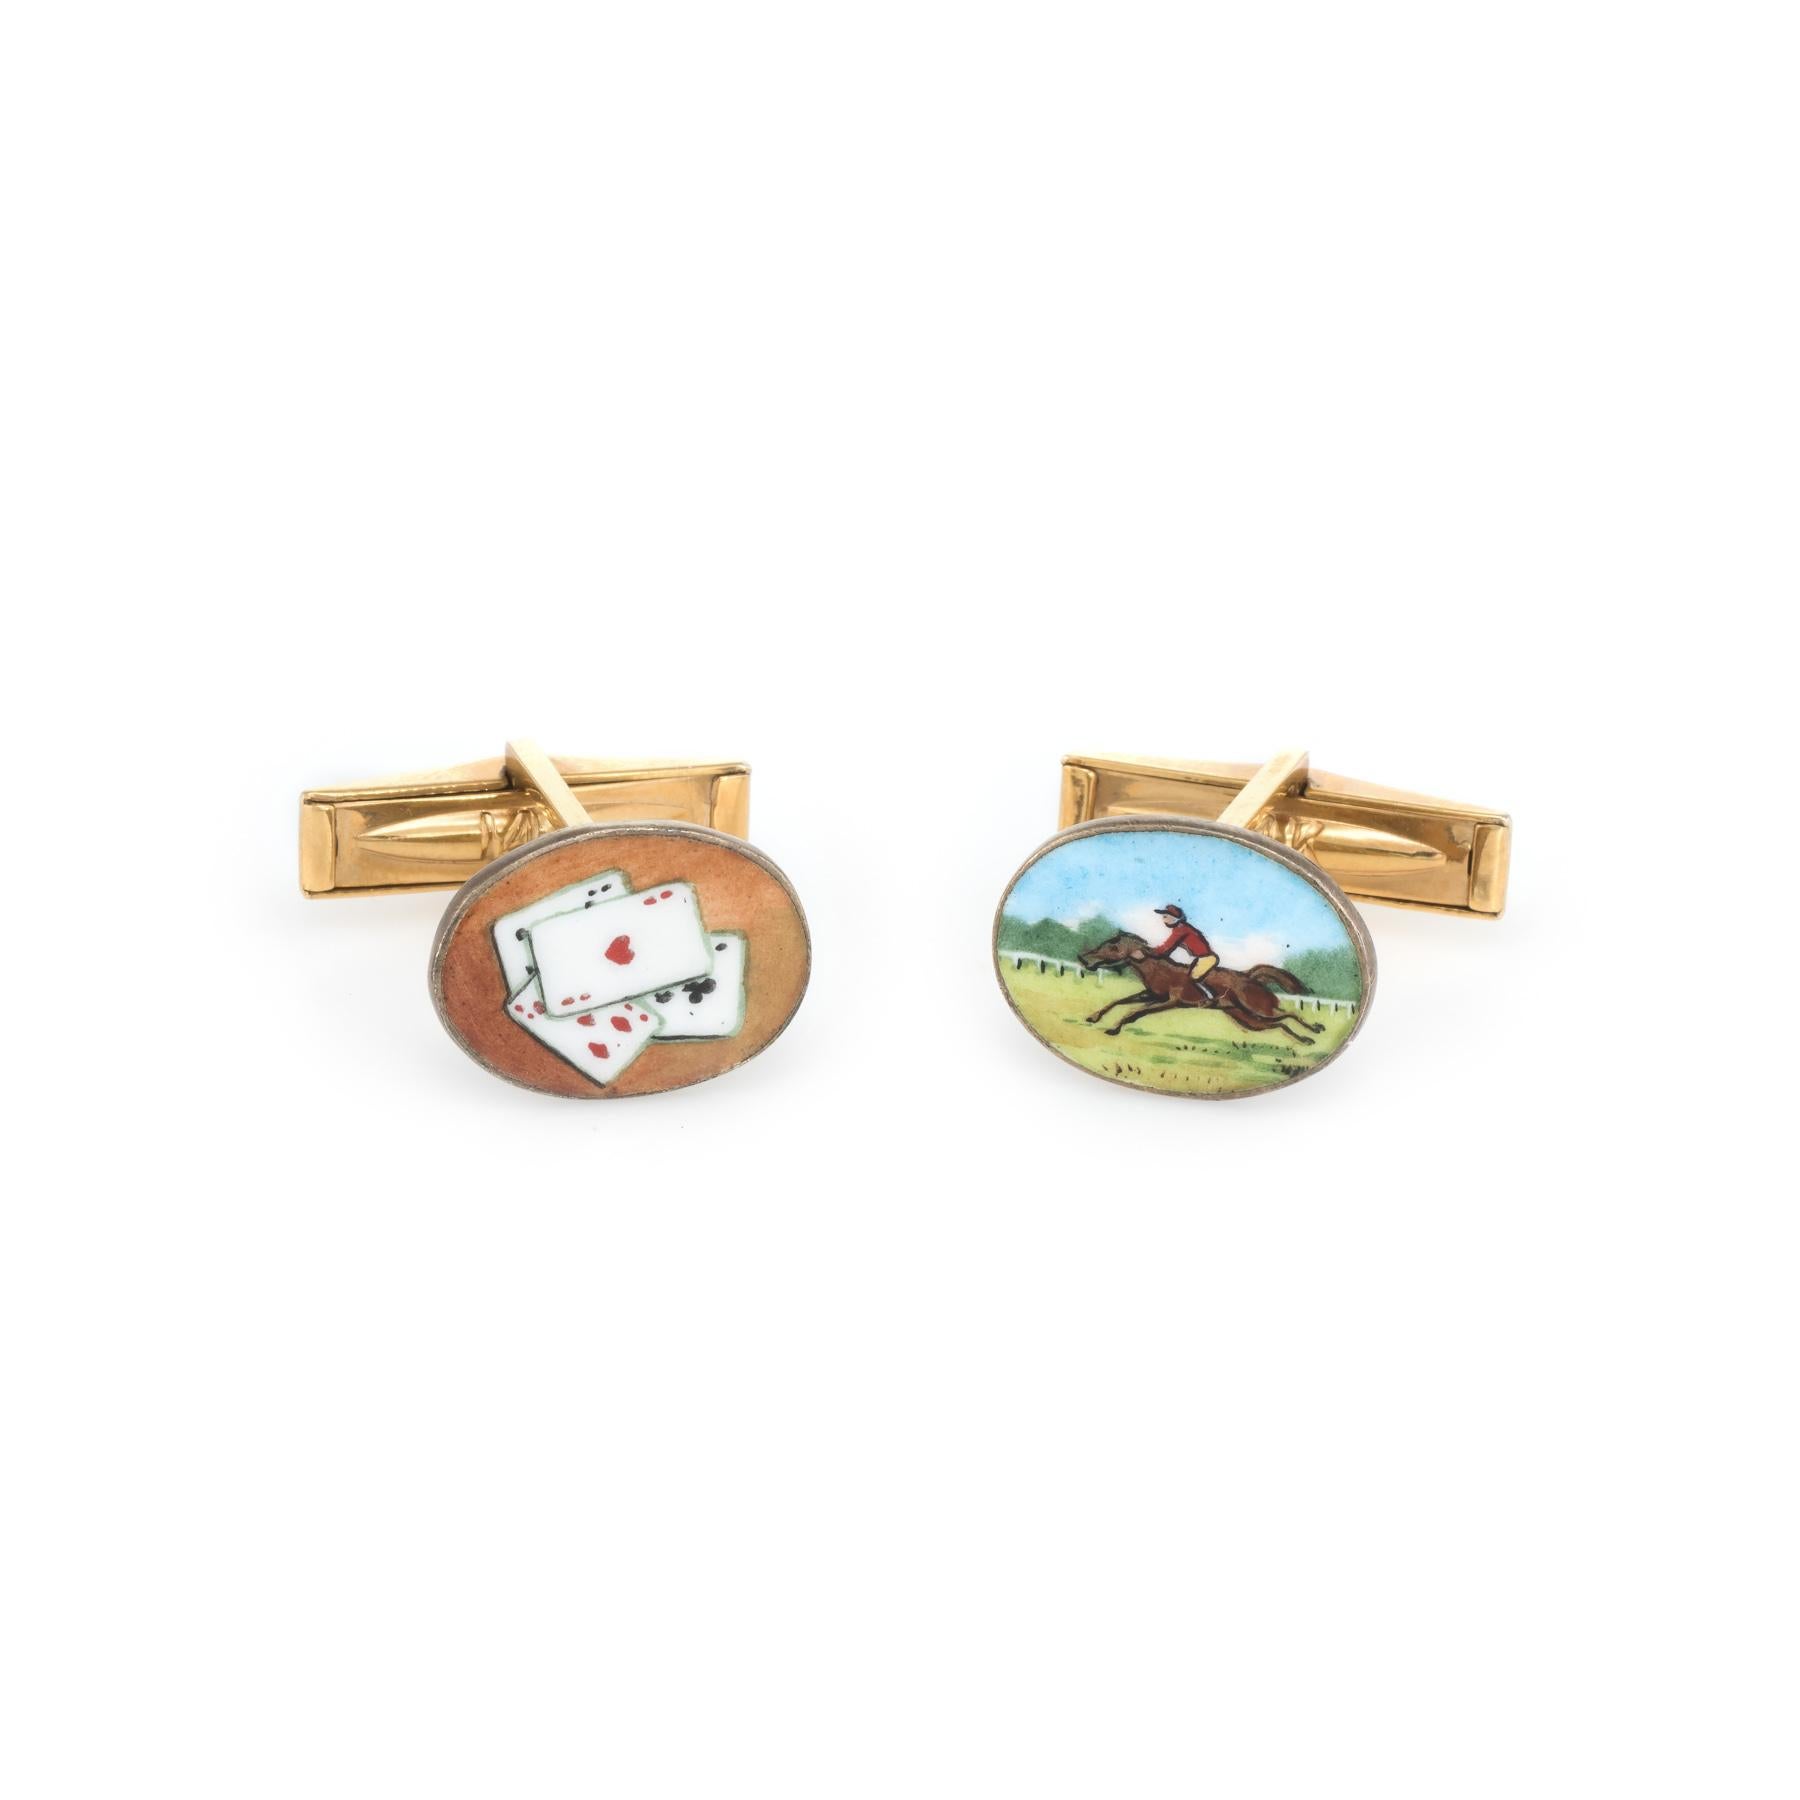 Finely detailed pair of vintage enamel crafted in 18k yellow gold (with 14k yellow gold backings). 

The cufflinks depict the story of the 'Road to Ruins' with gambling cards, a bottle of champagne, horse racing and a woman in a ballerina costume.